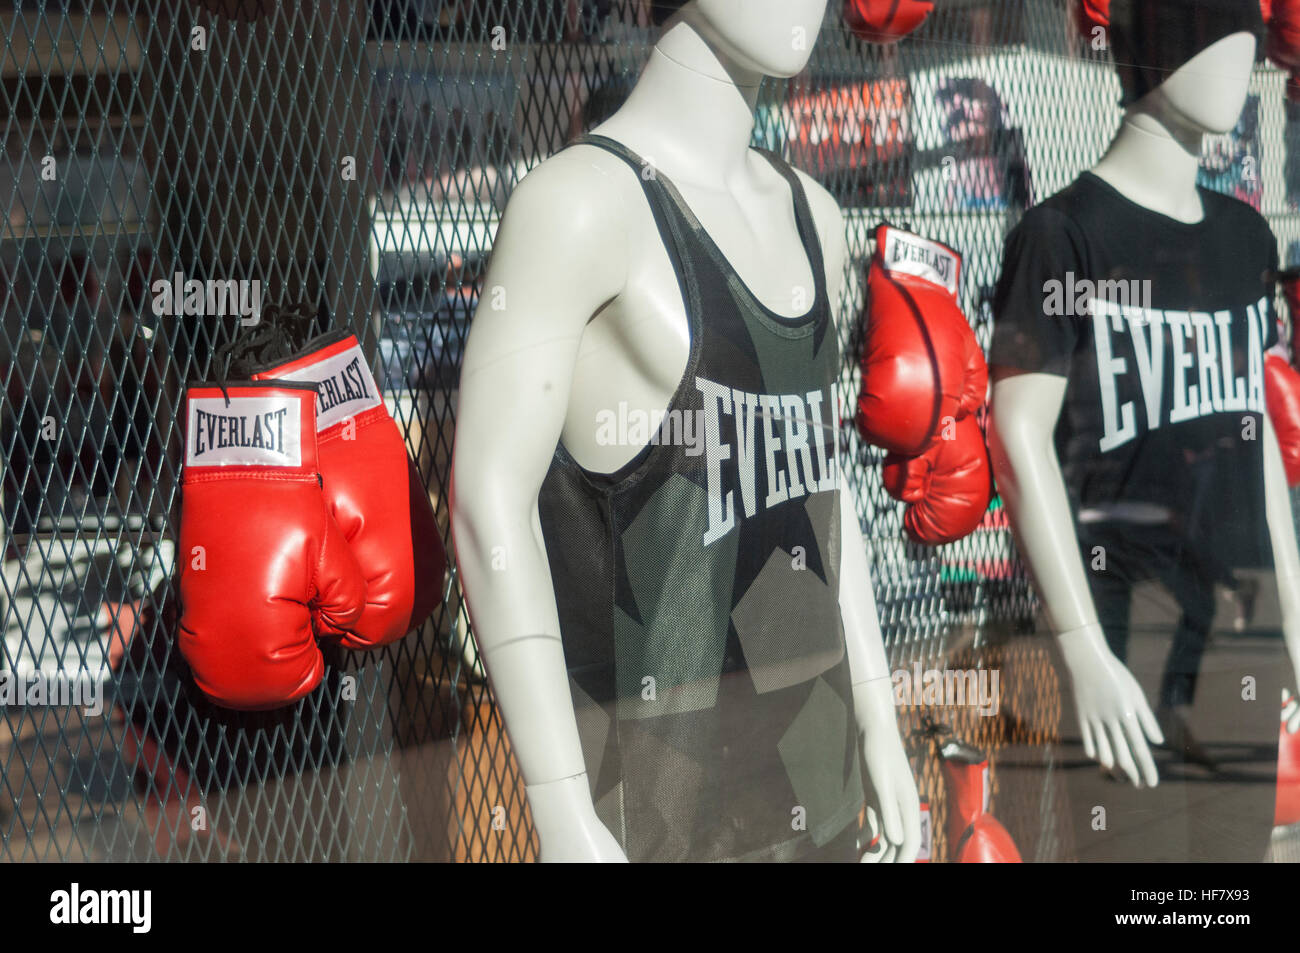 Everlast brand boxing paraphernalia in a store in New York on Sunday,  December 25, 2016. Due to declining participation in sports by youth, sales  of sporting goods have hit record lows. The